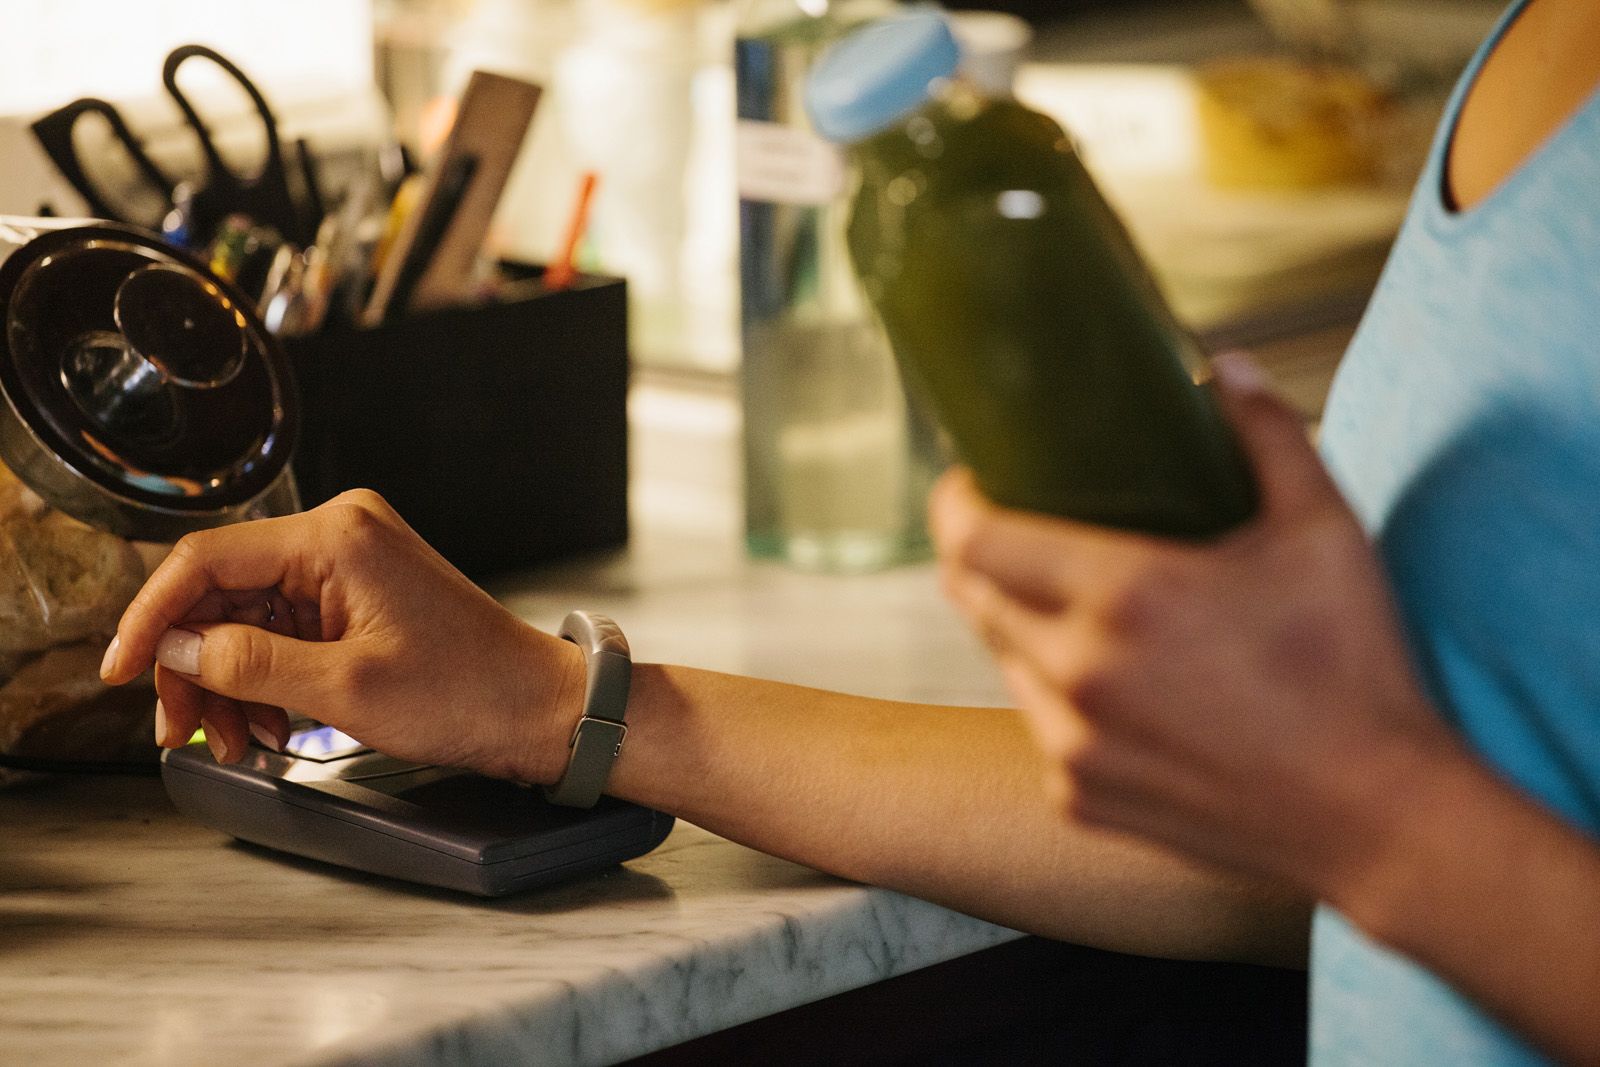 jawbone partners with amex for contactless payment up4 and replaces up24 with up2 tracker image 1